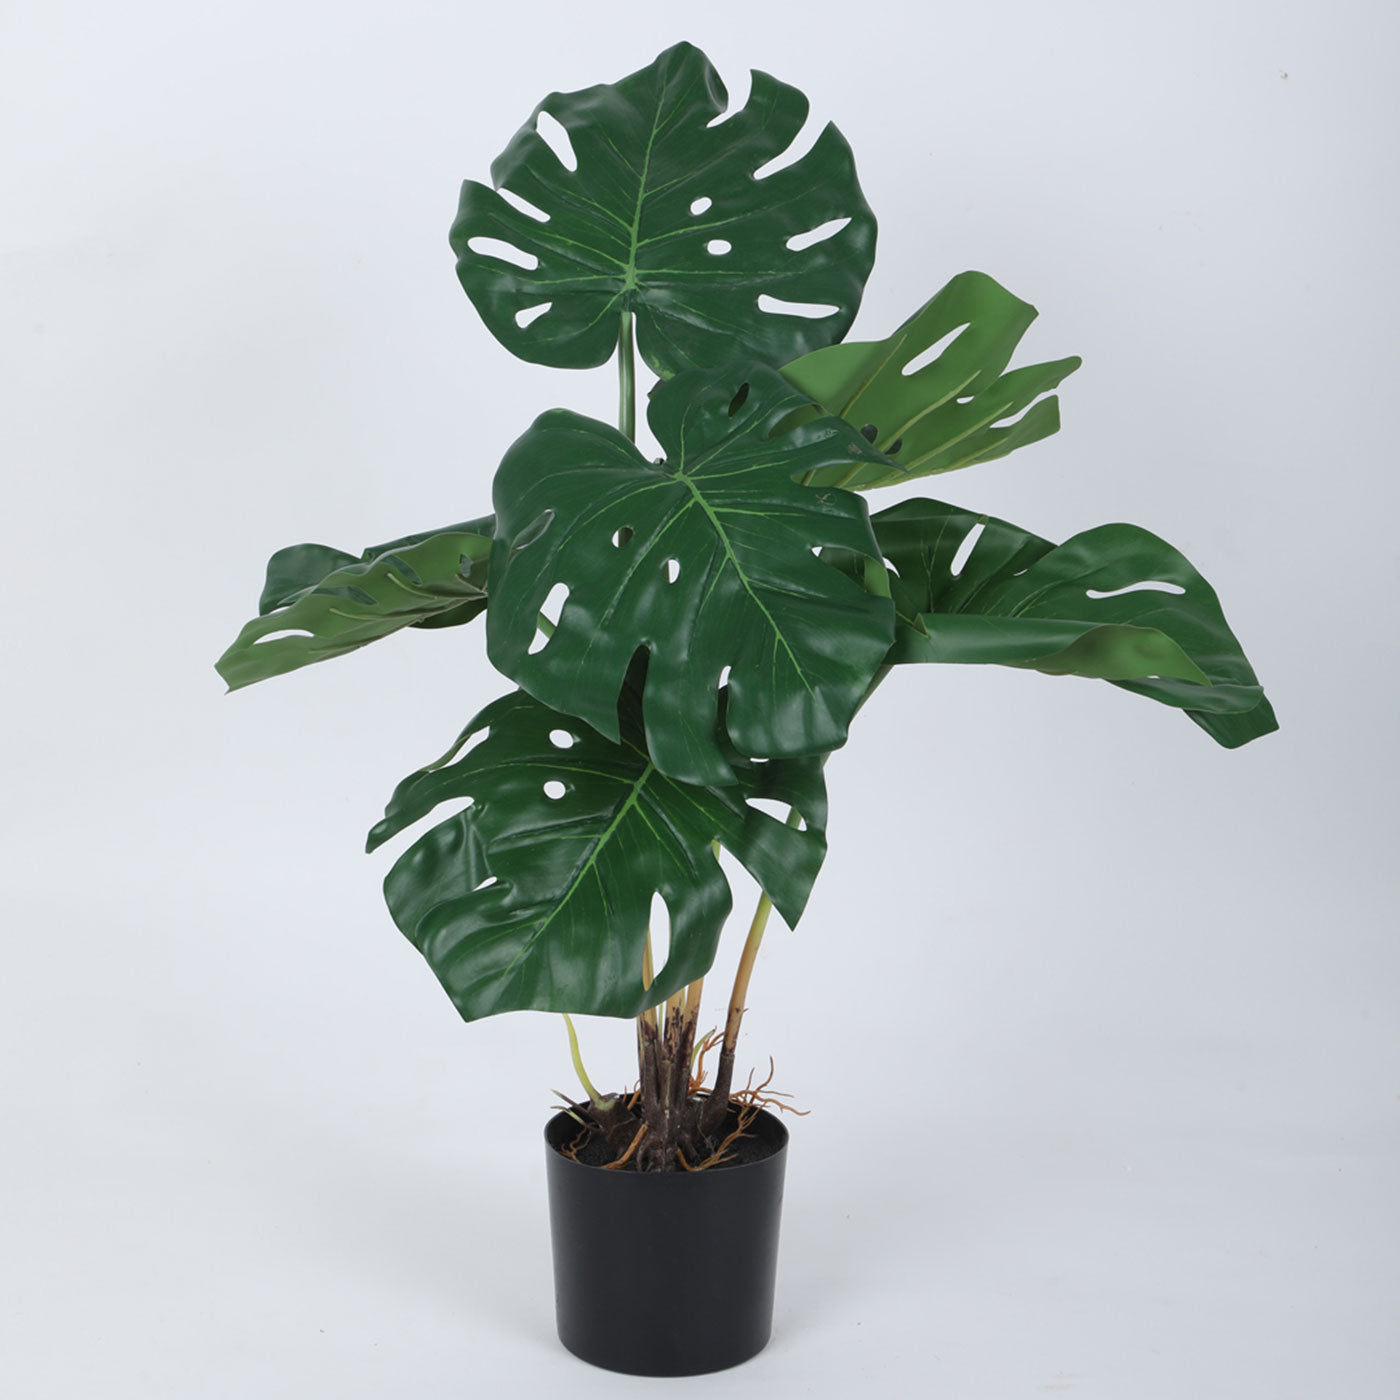 Artificial Real Touch Monstera Plant for Home Decor/Office Decor/Gifting | Natural Looking Indoor Plant (With Pot, 75 cm tall, Green)